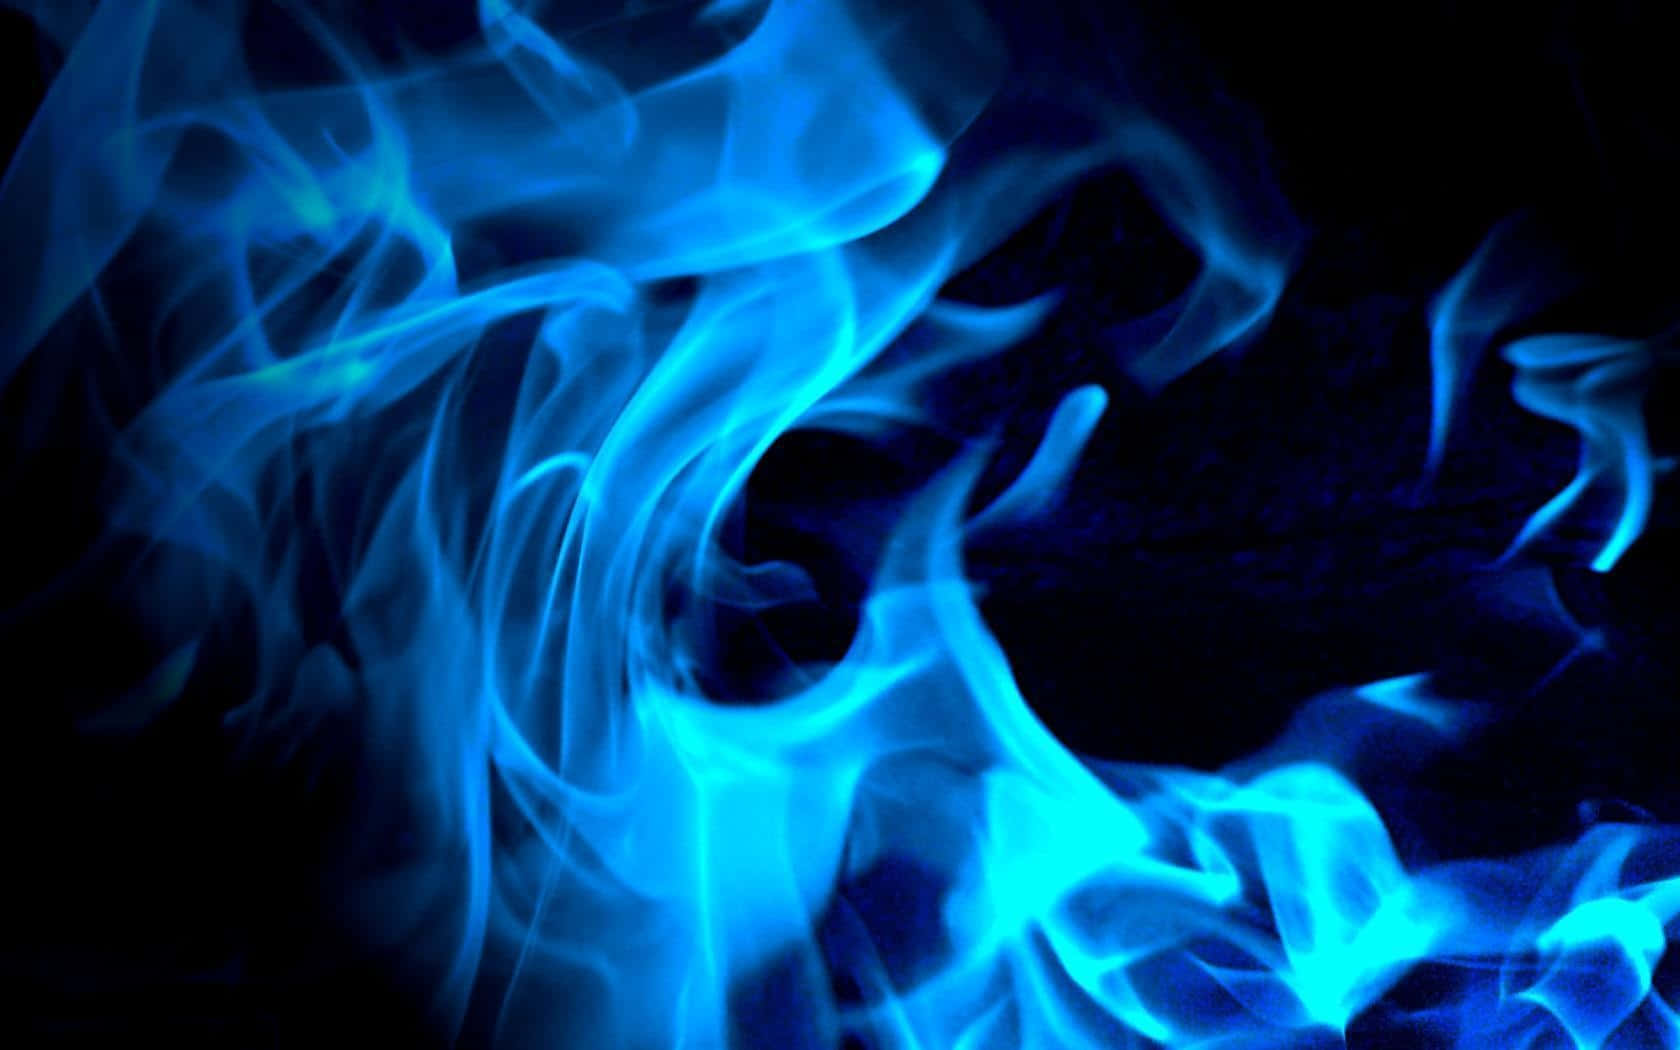 Get lost in the captivating blue fire.